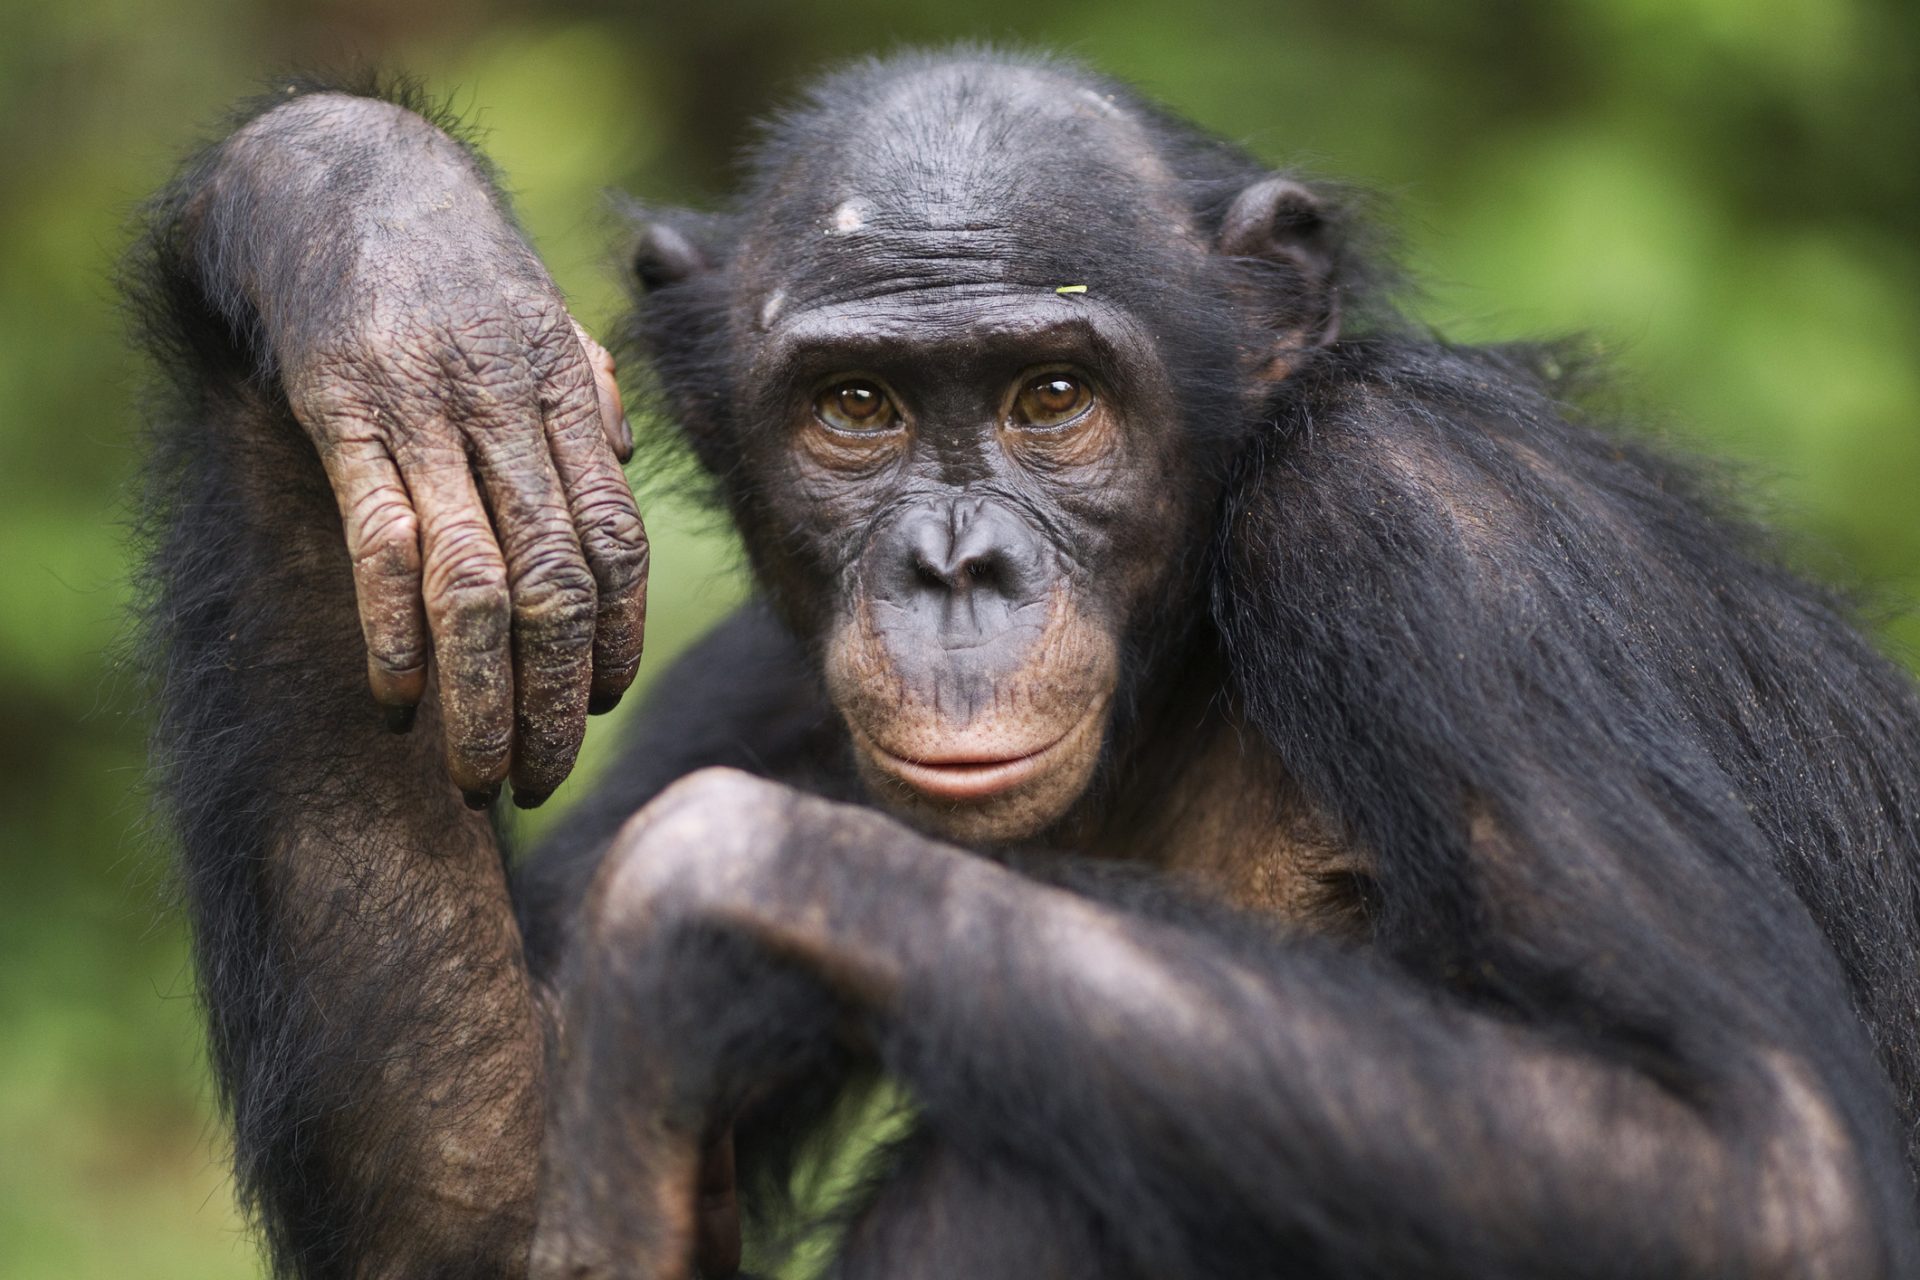 Researchers just discovered something weird about chimps and bonobos